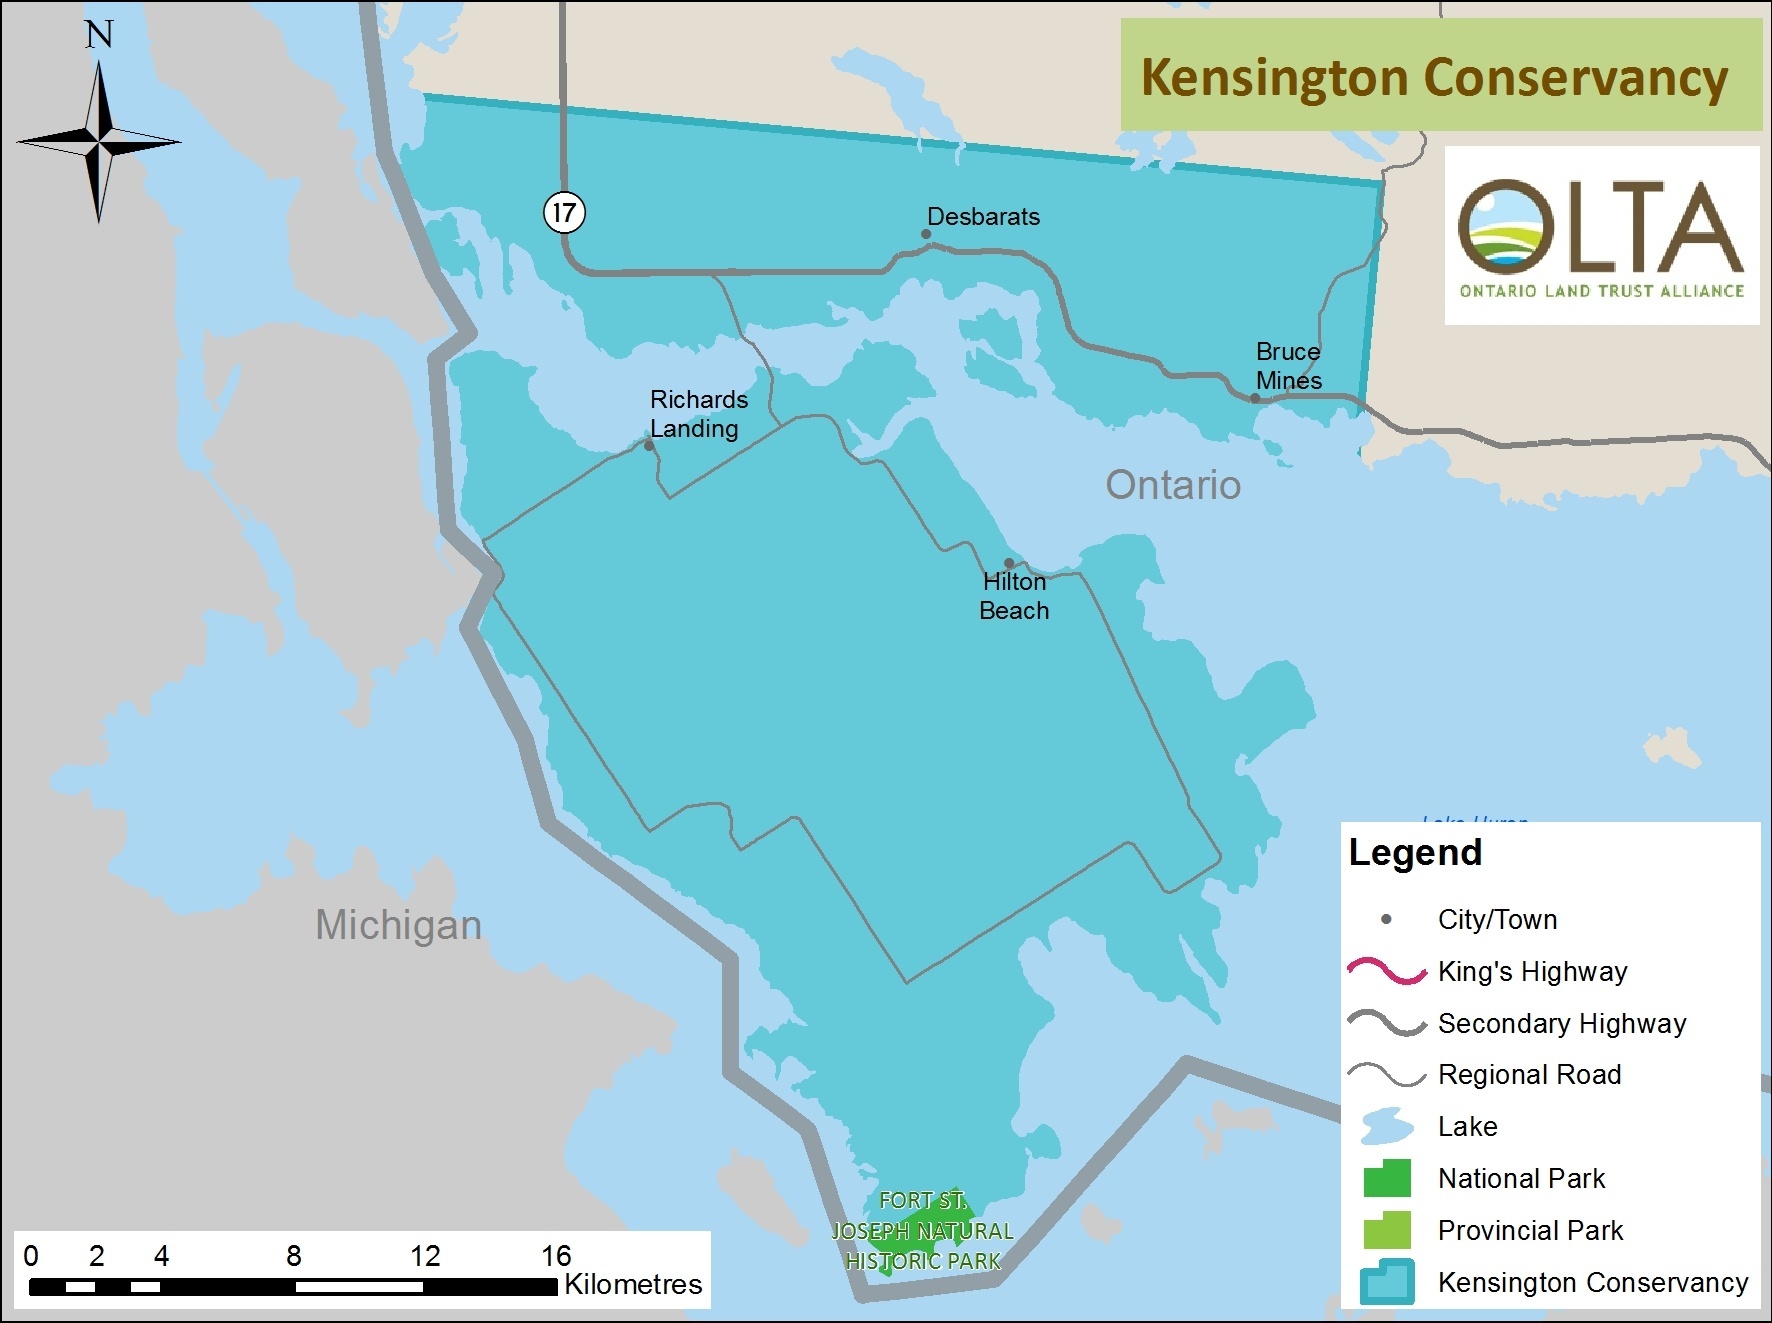 The Kensington Conservancy area of operations map